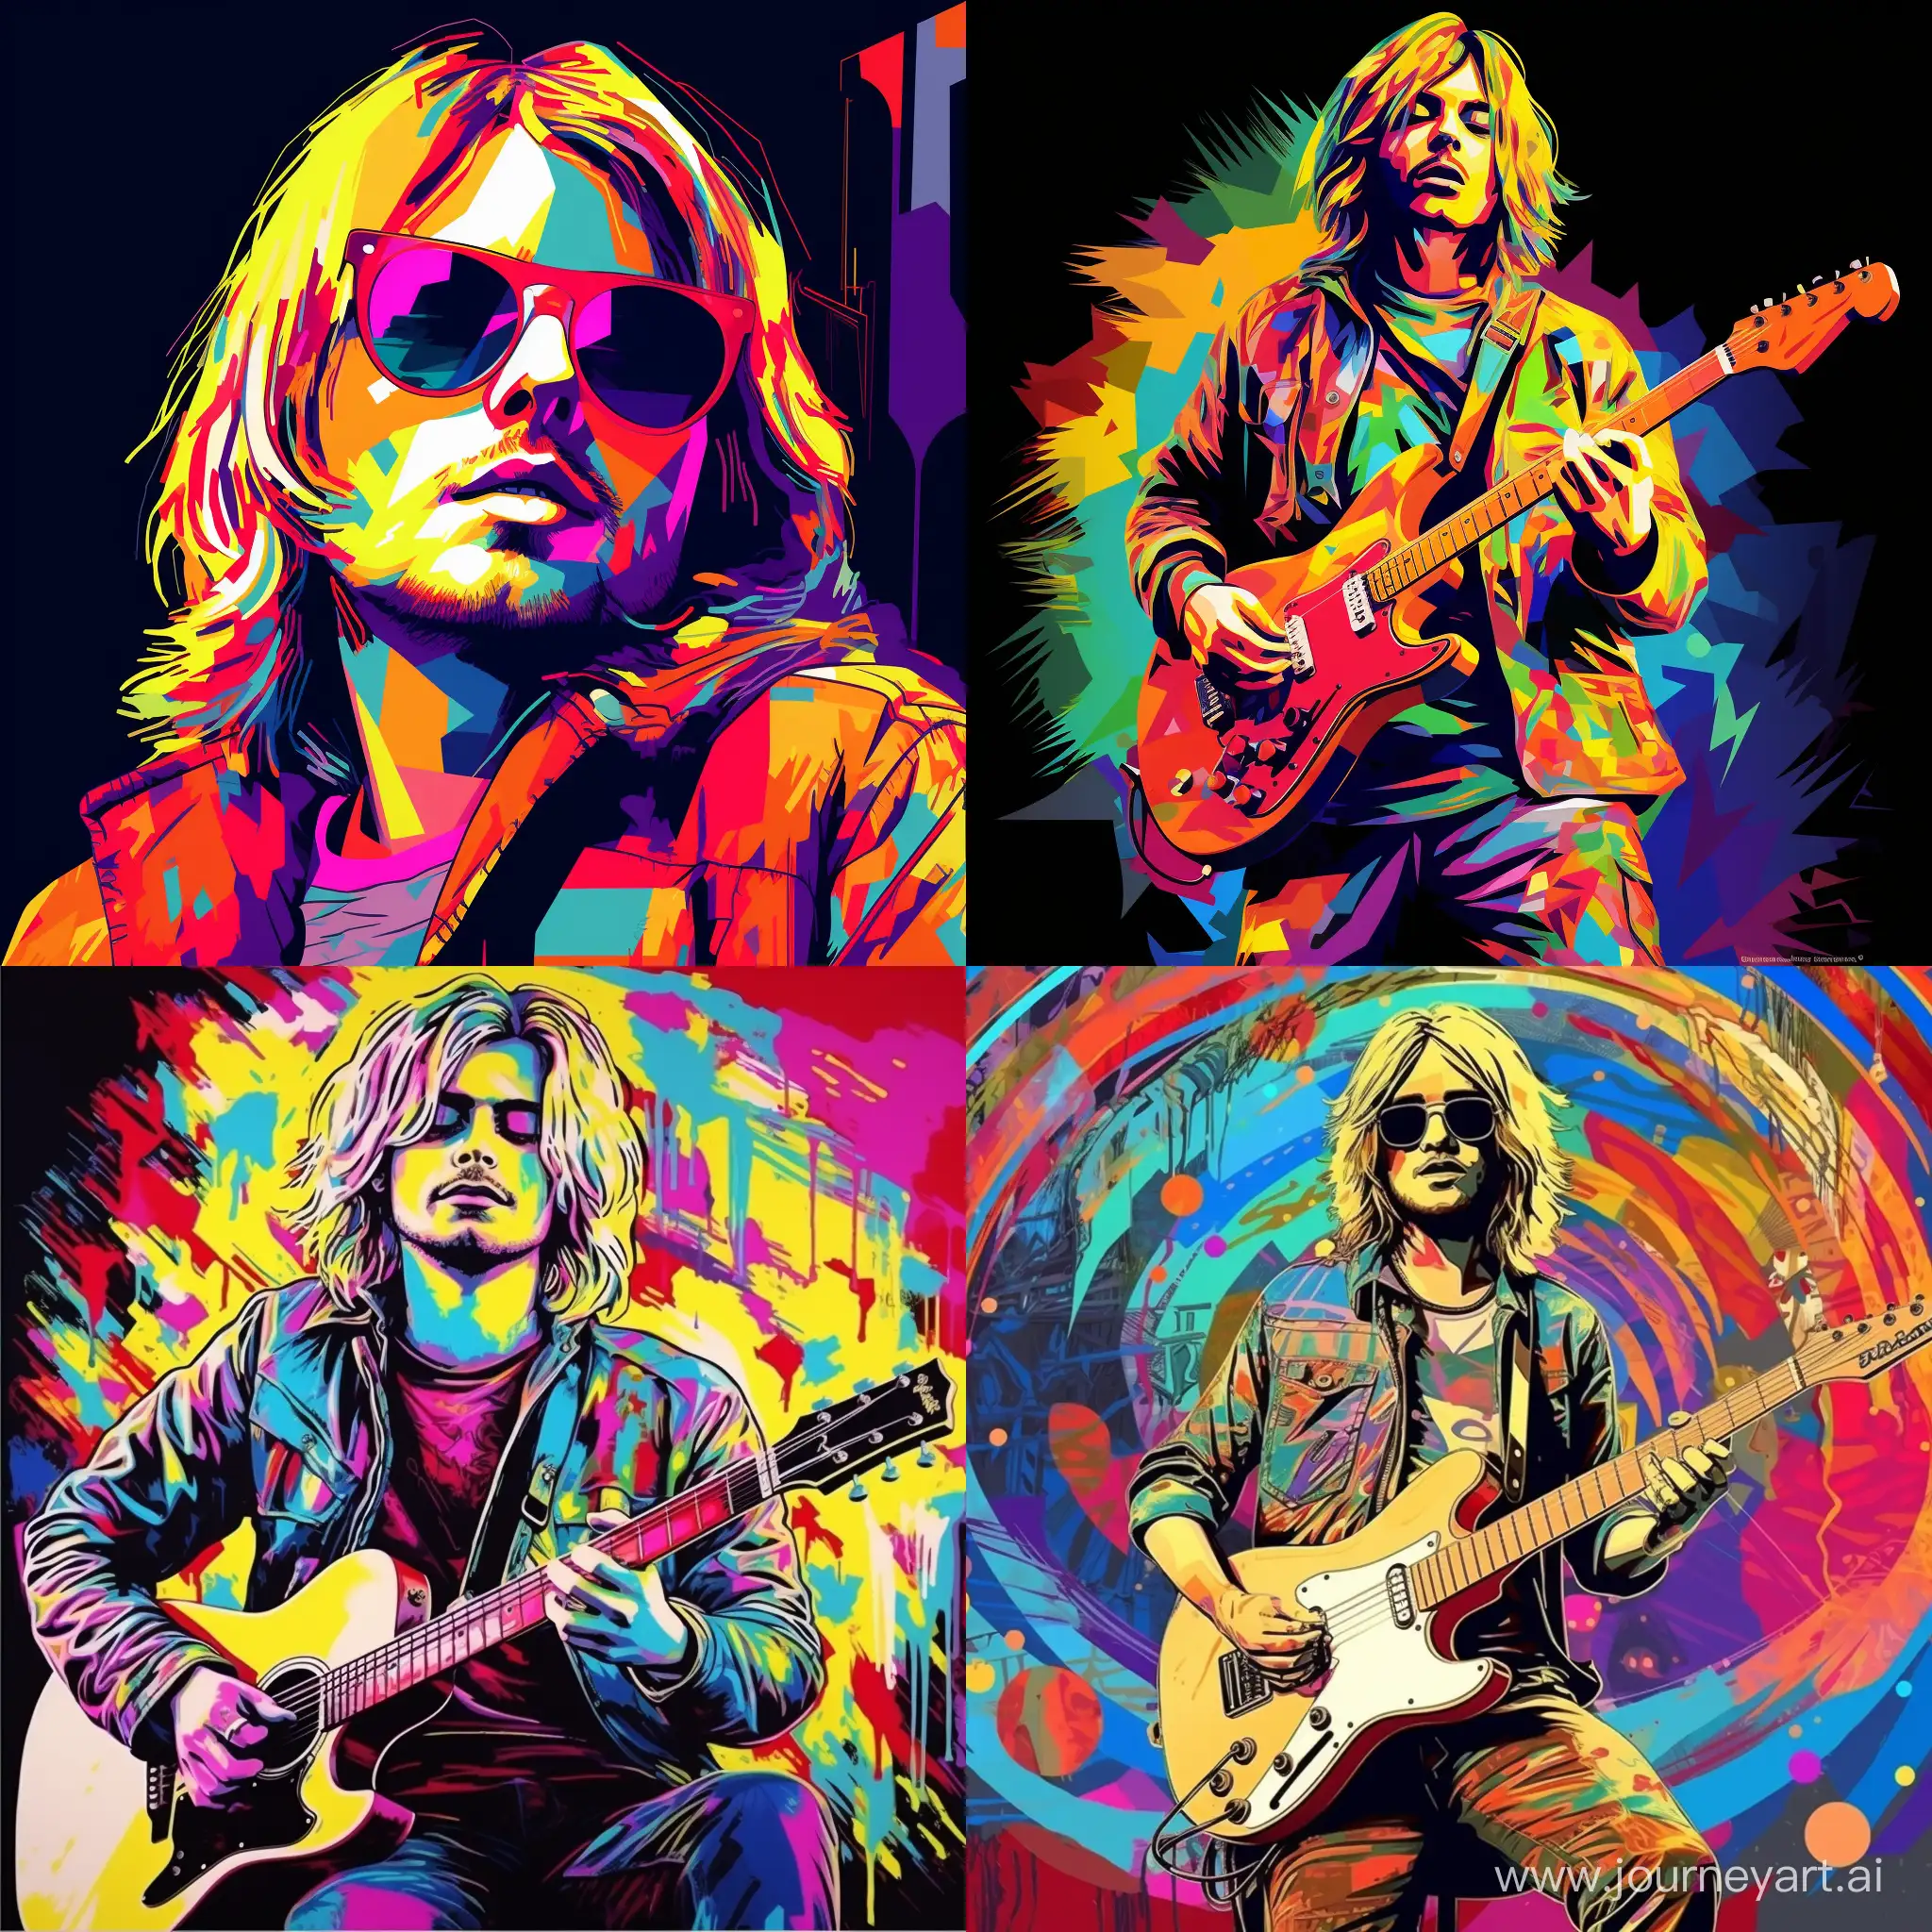 Kurt Cobain in, on the background of music symbols, in the style of pop art, caricature, bright colors